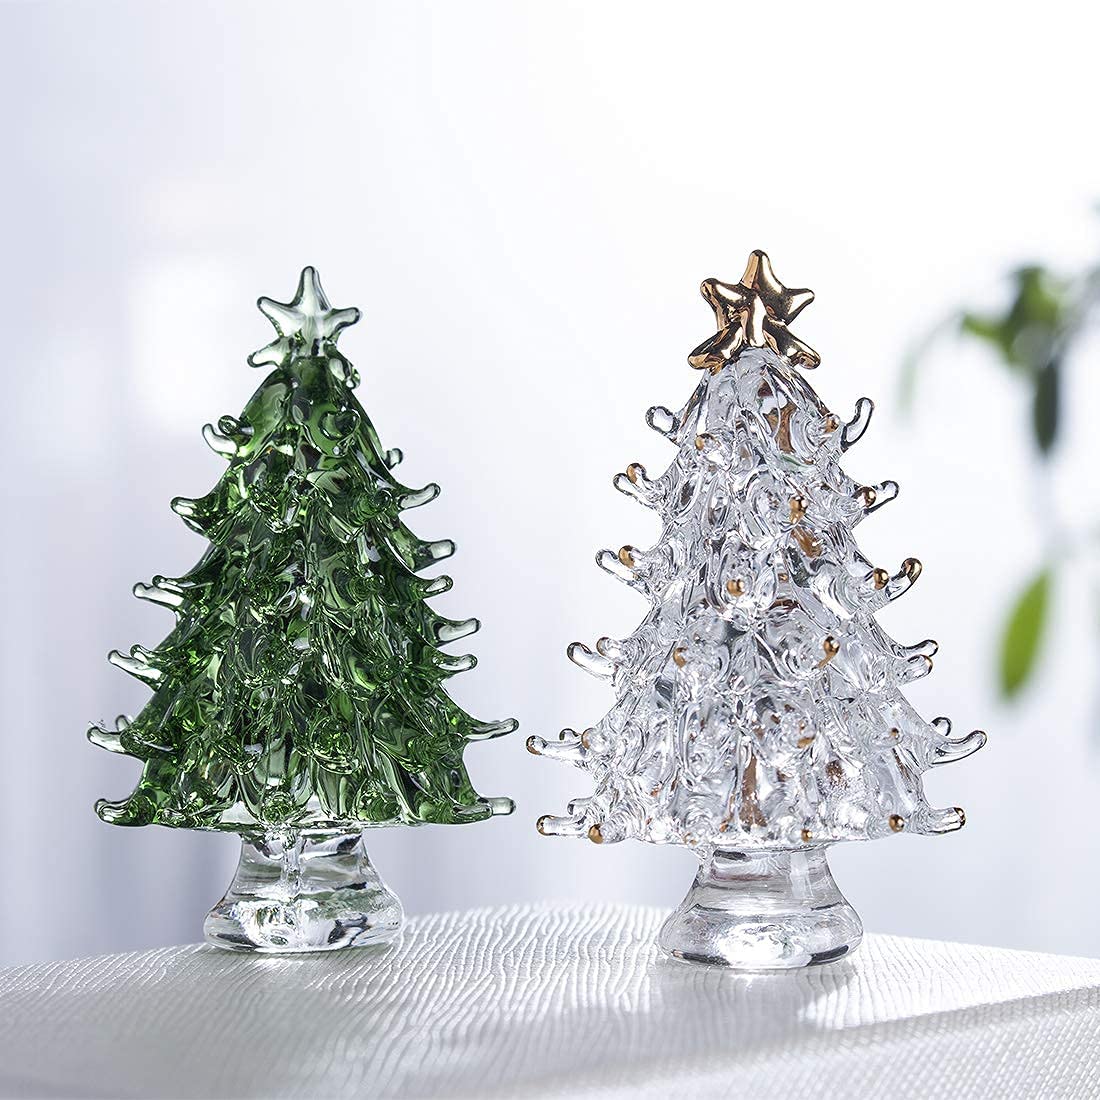 5CM White And Green Crystal Christmas Glass Tree-GOON- Home Decoration, Christmas Decoration, Halloween Decor, Harvest Decor, Easter Decor, Thanksgiving Day Decor, Party Decor